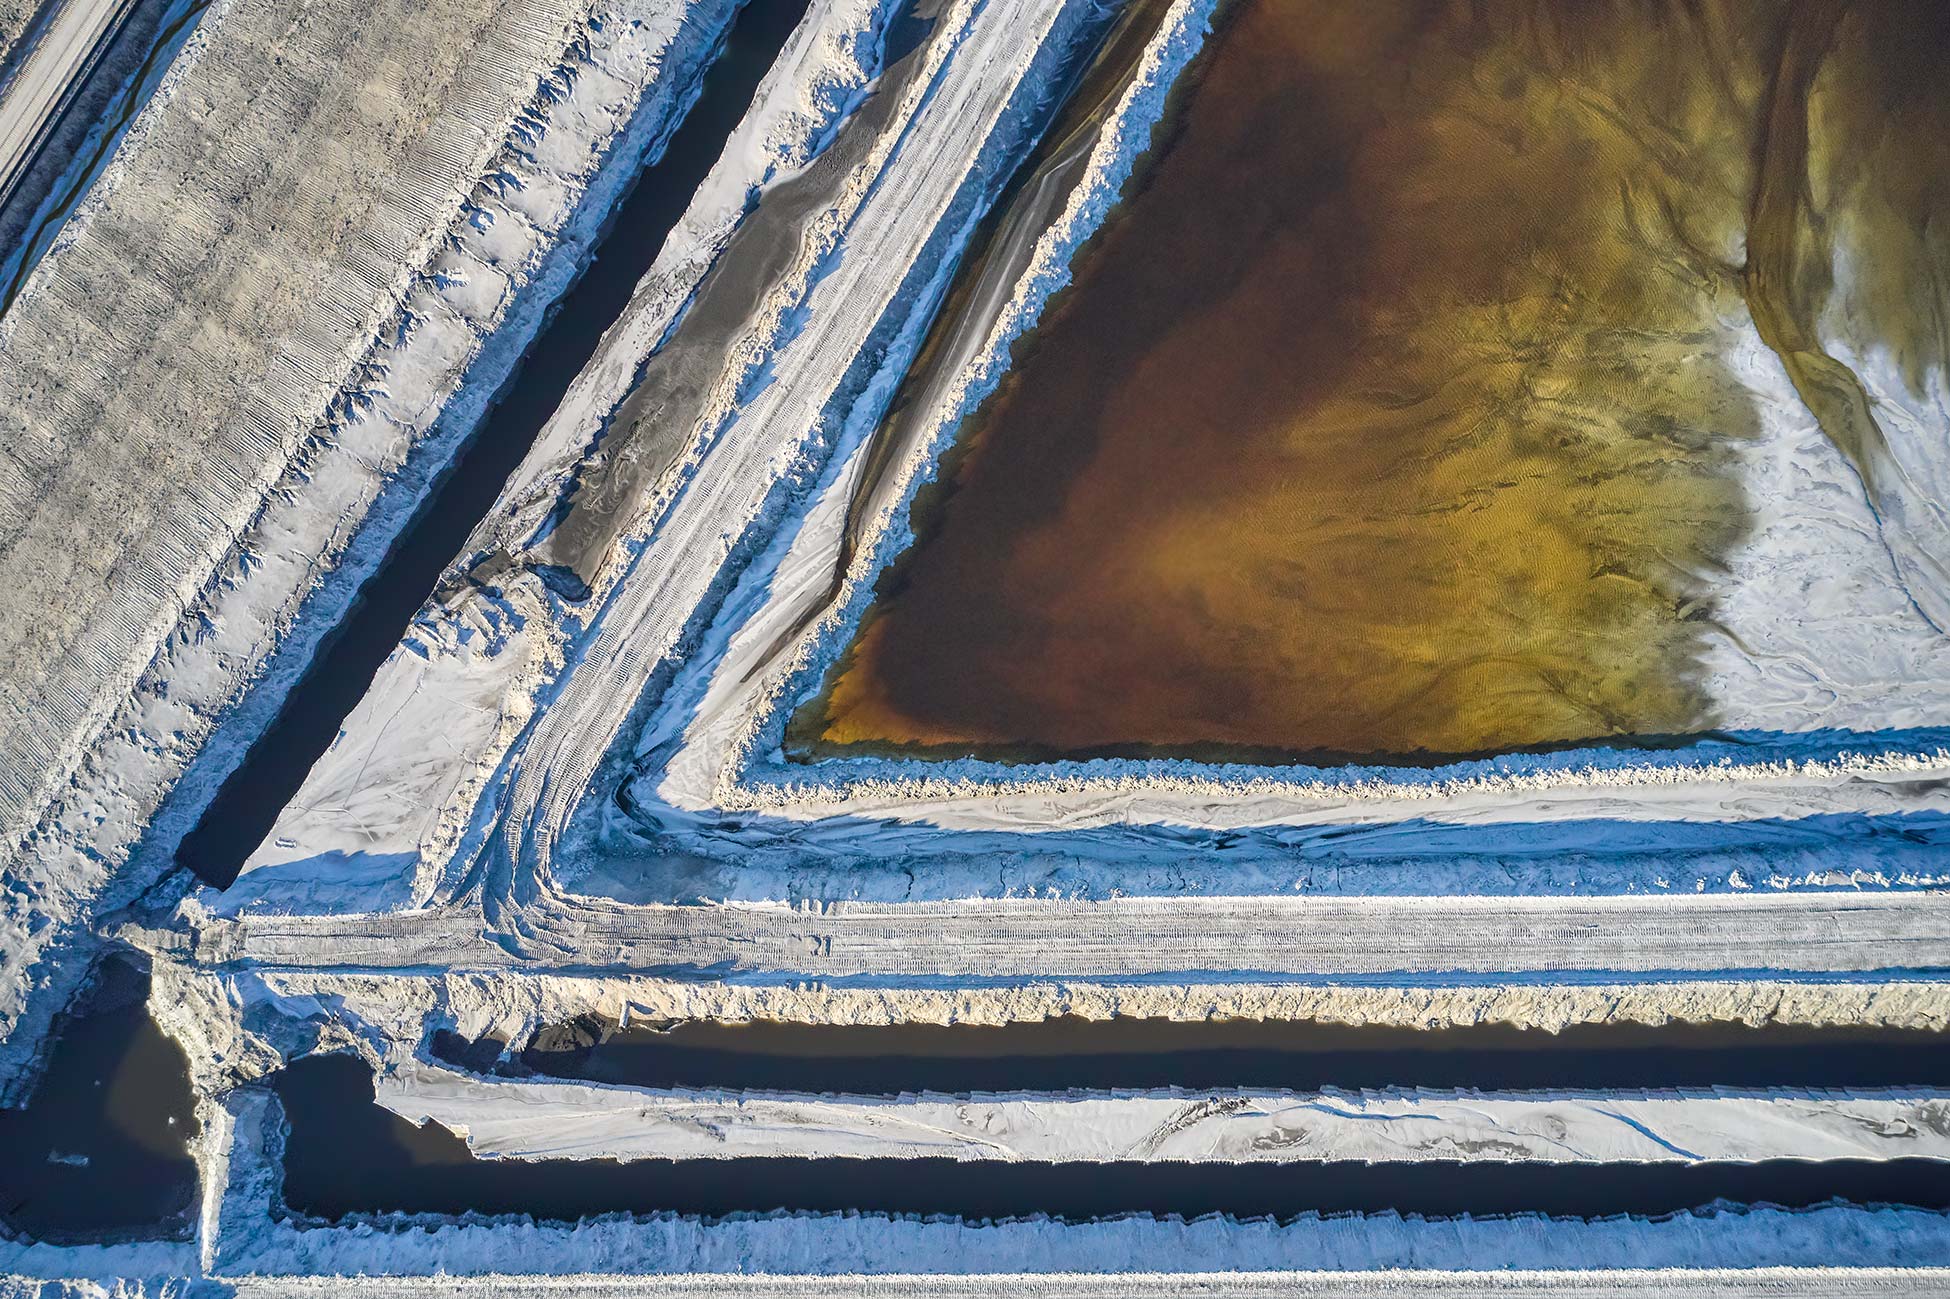 Drone Photography of Phosphate Mining in Atlanta